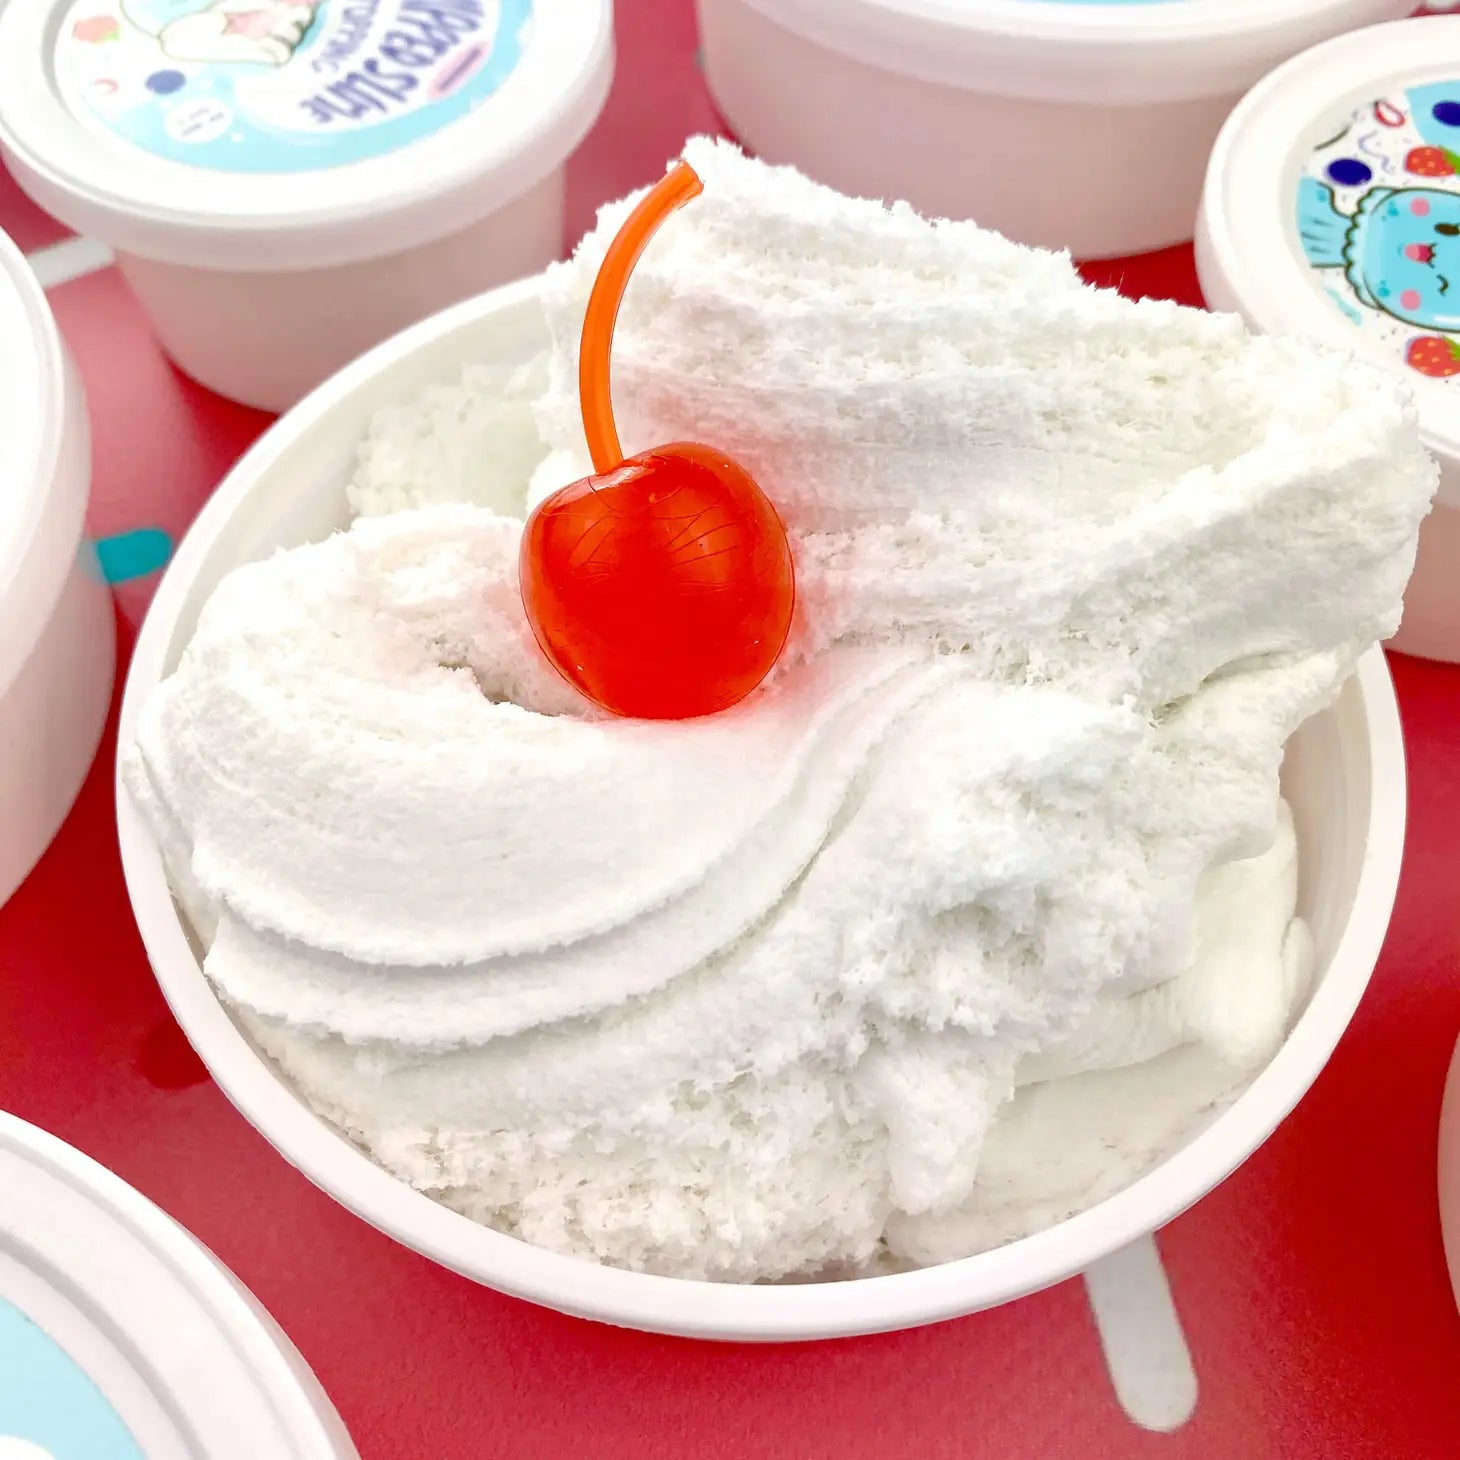 Whipped Slime Topping (8oz) by Kawaii Slime